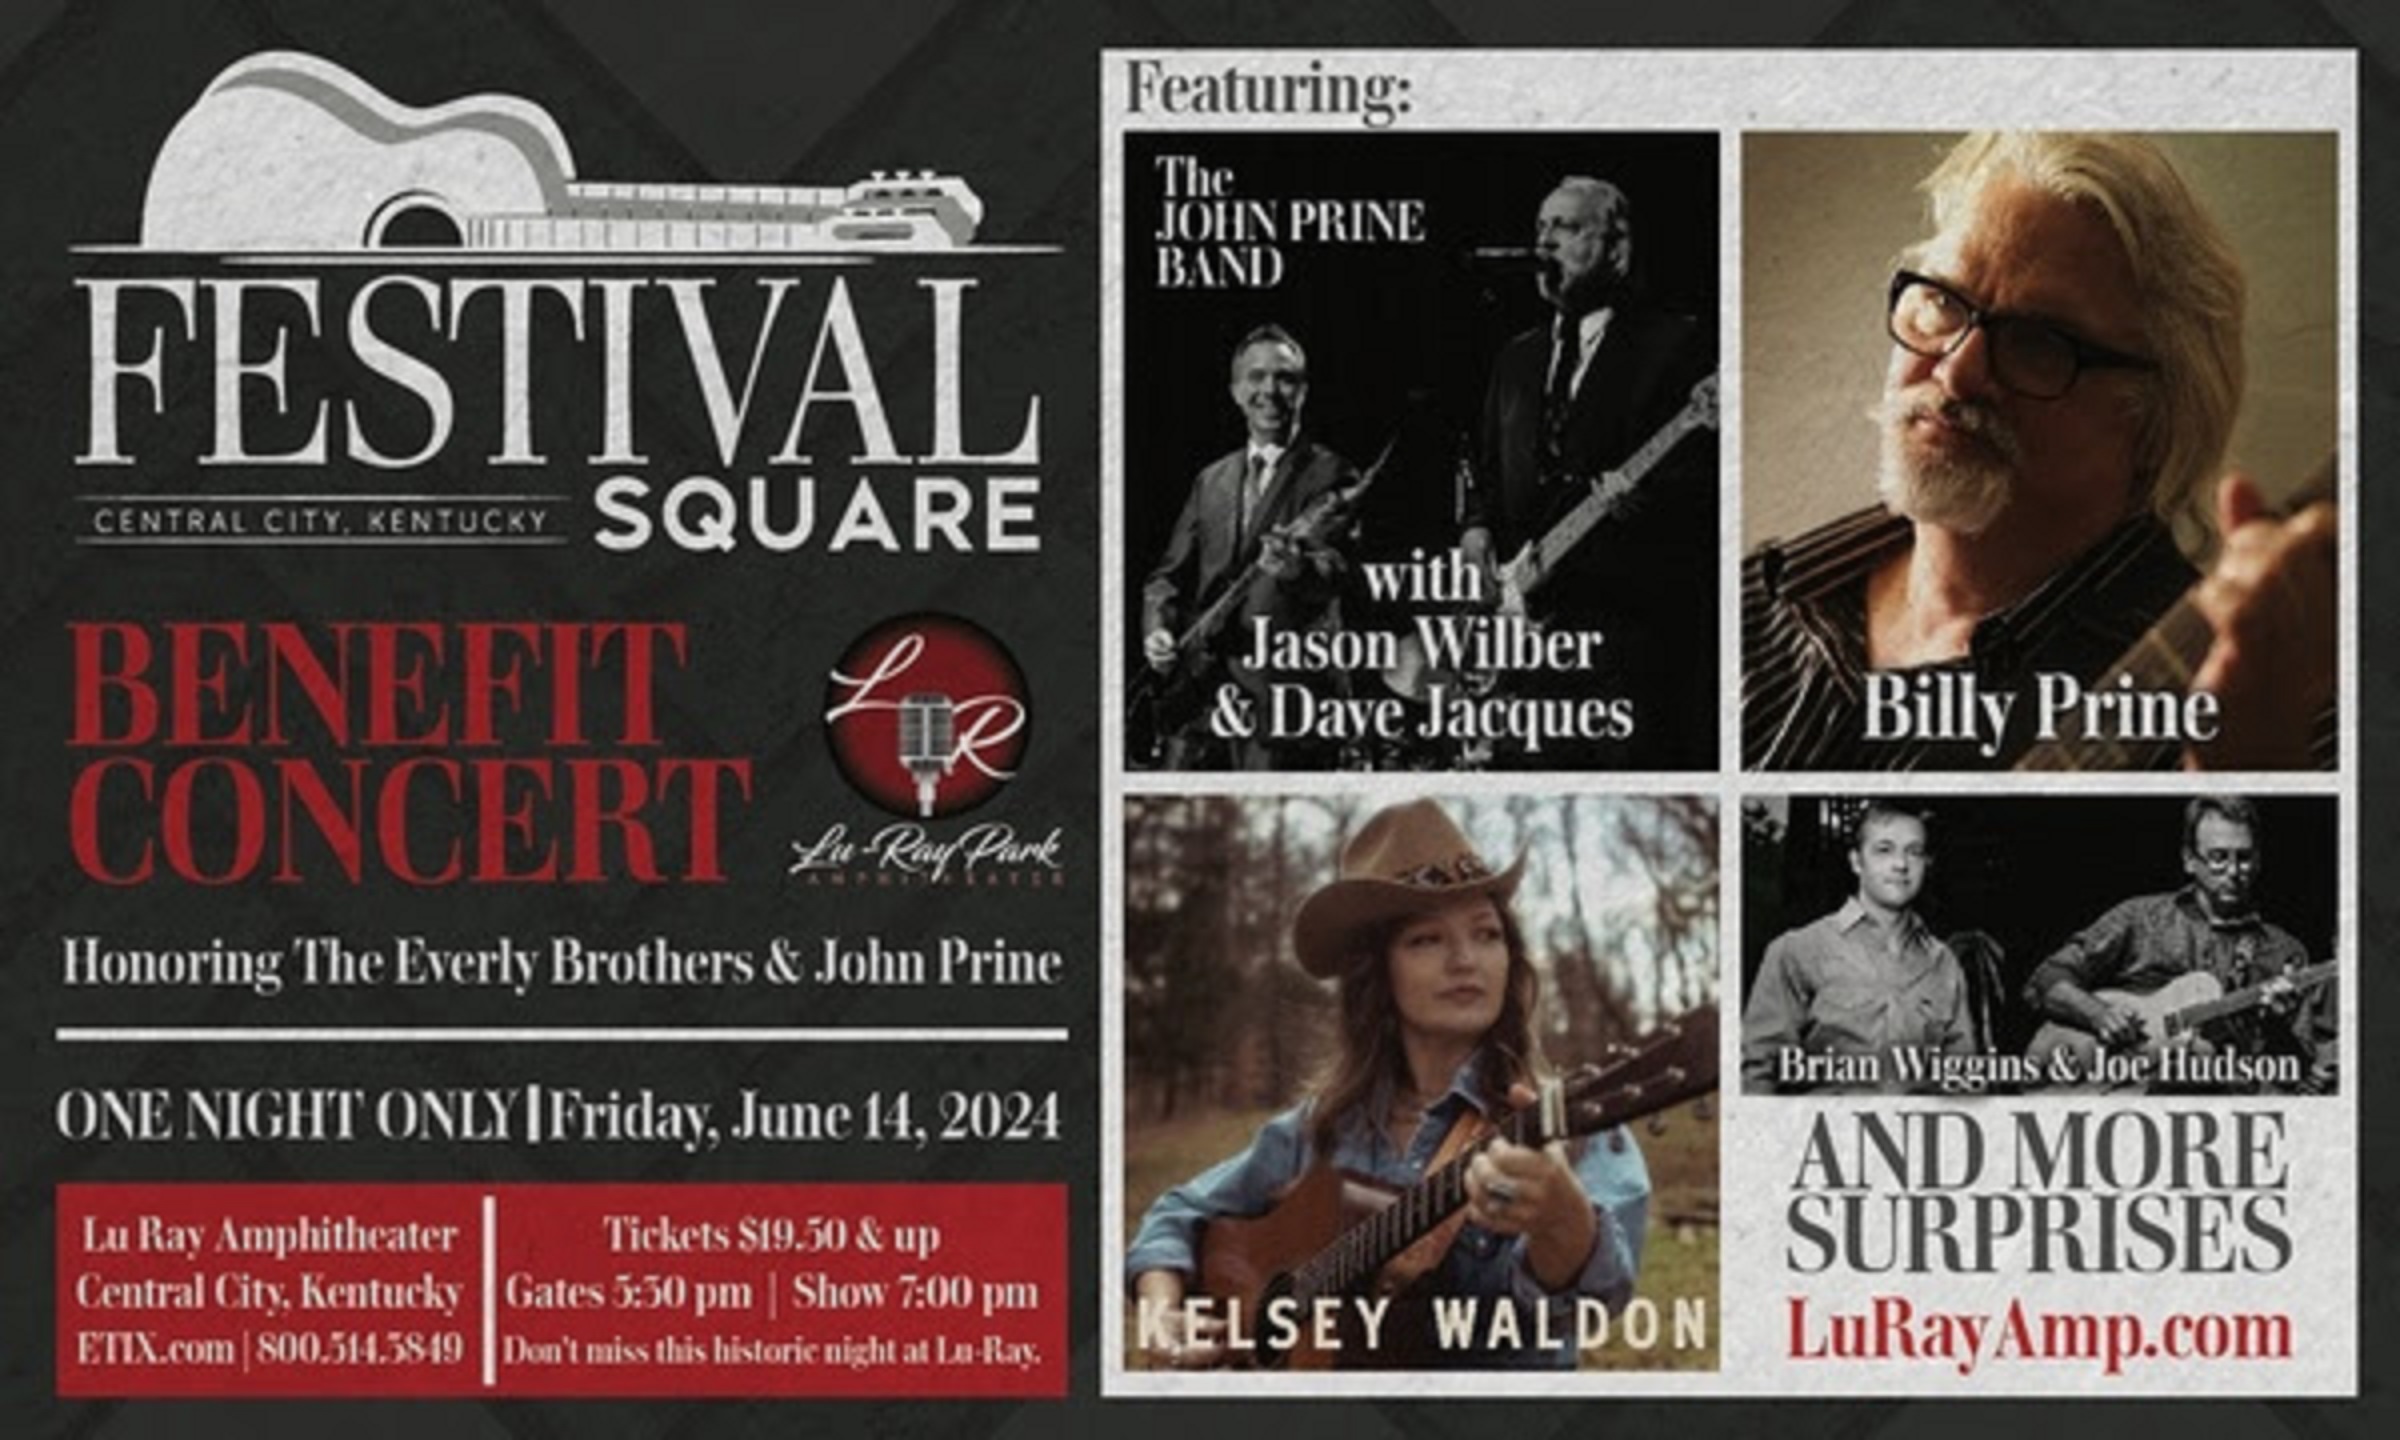 John Prine to be honored at Central City, KY's Festival Square Benefit Concert on June 14